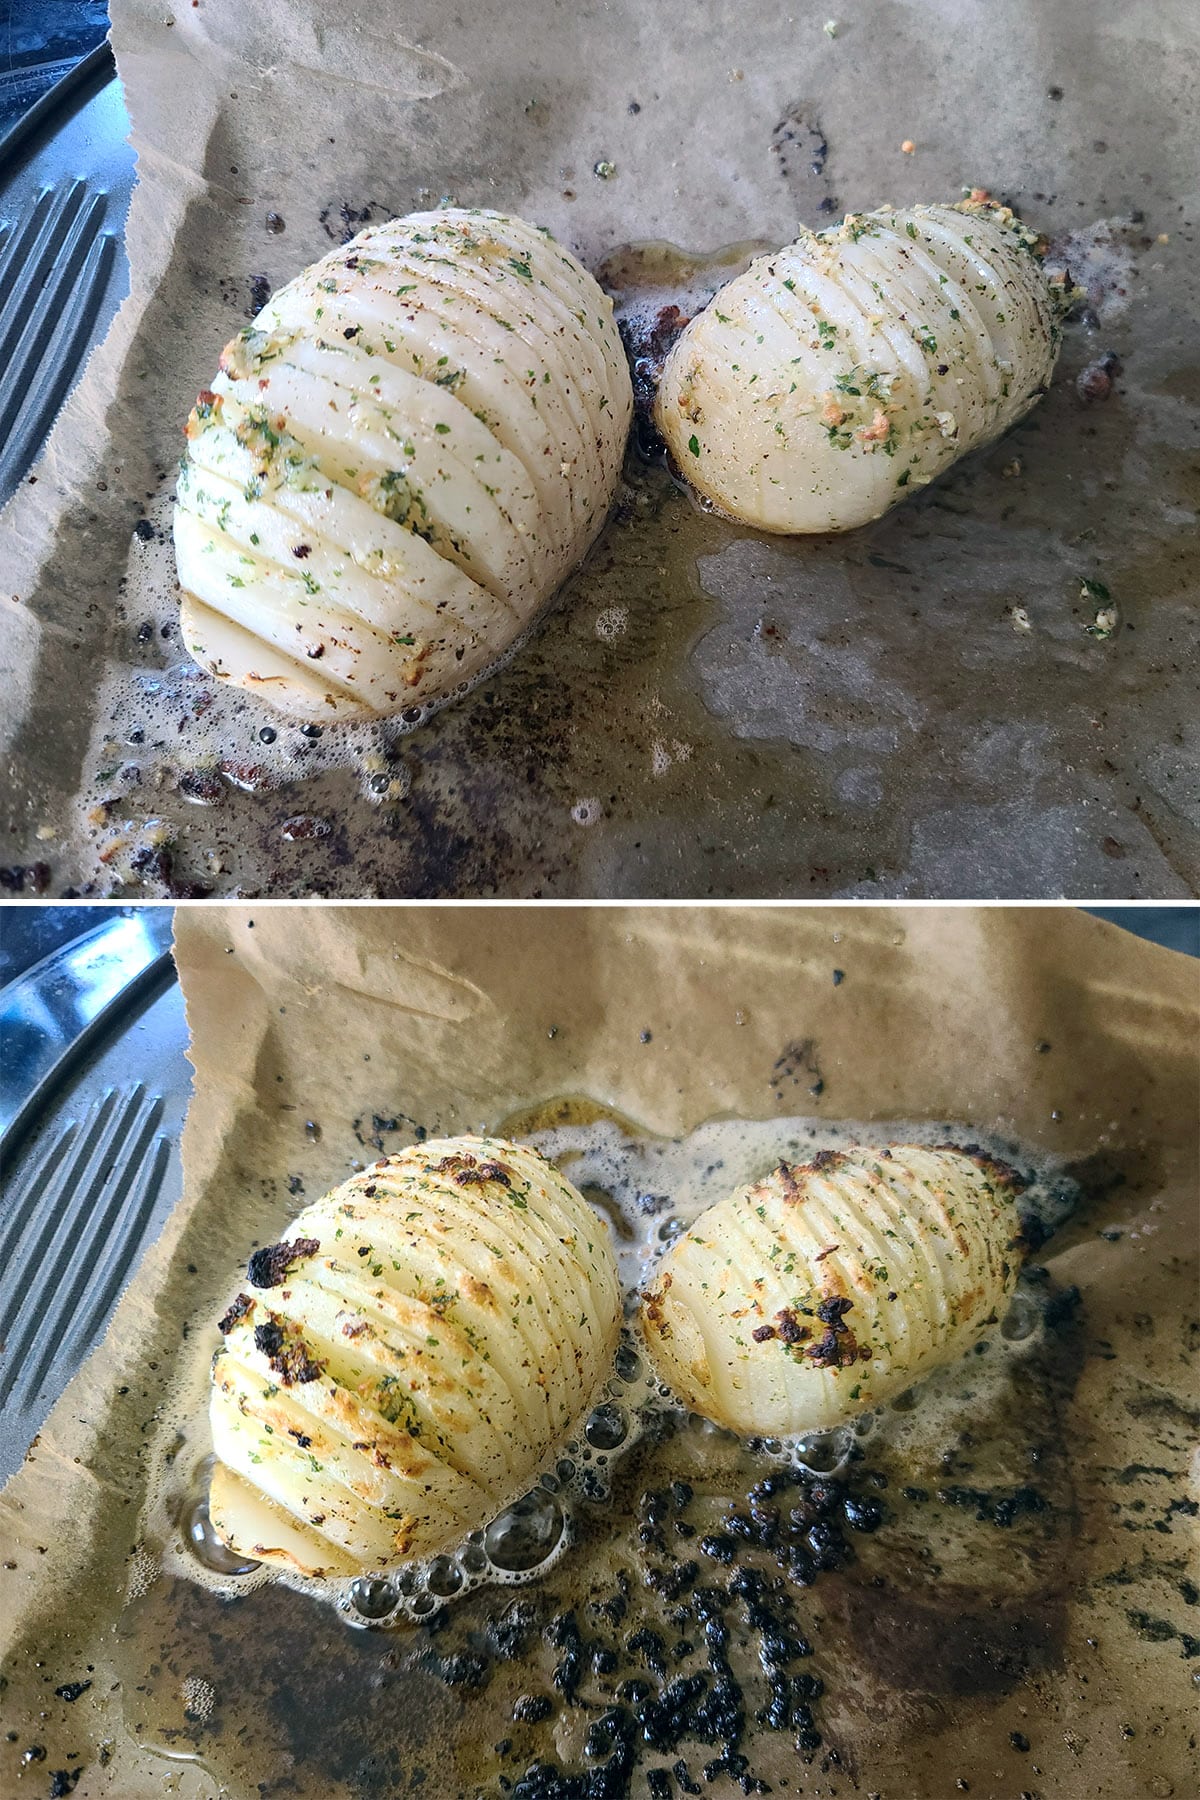 A 2 part image showing the baked turnips in process.